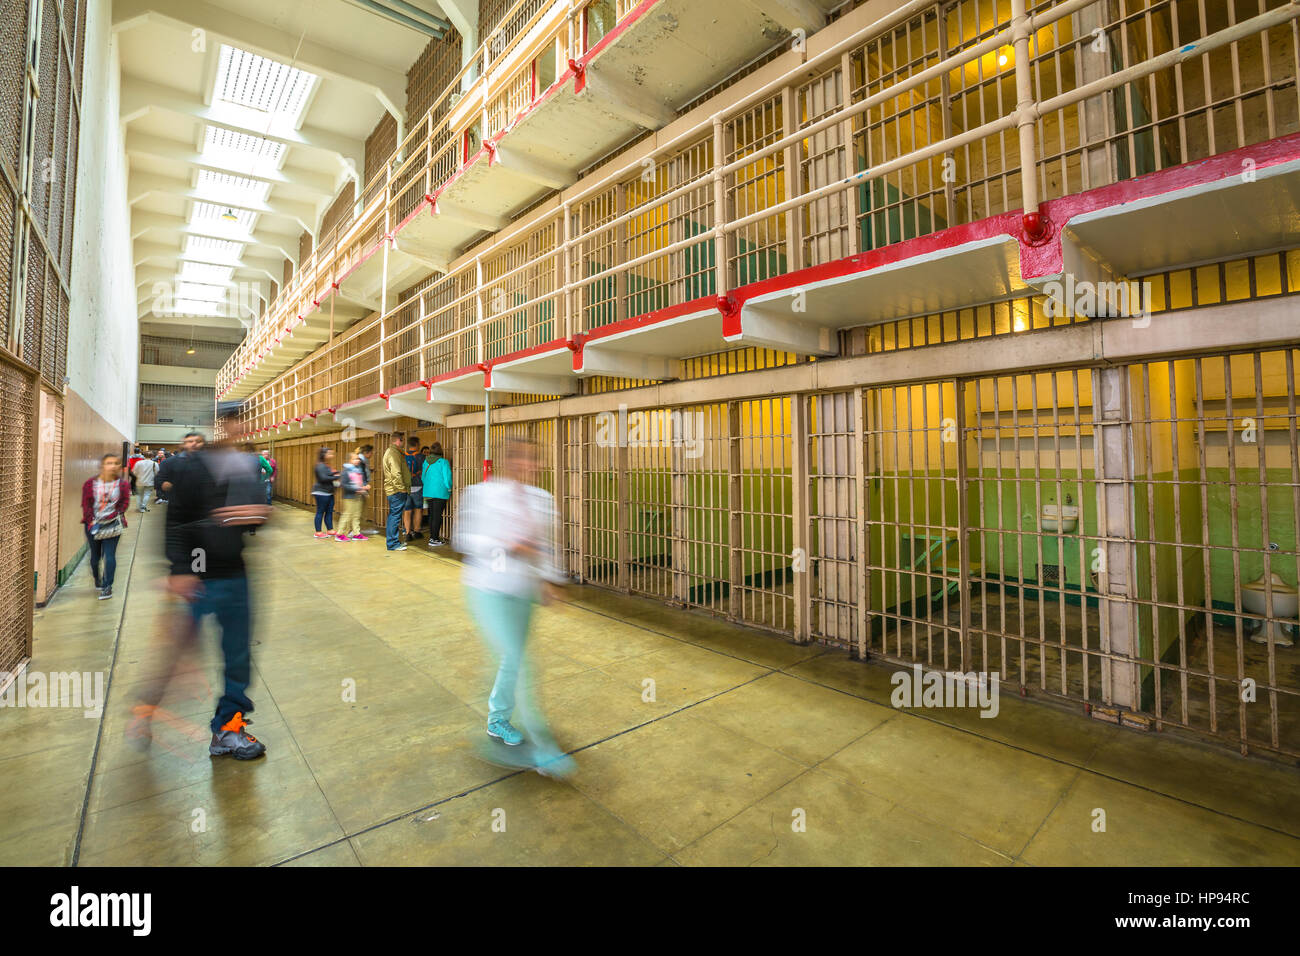 San Francisco, California, United States - August 14, 2016: main room with three rows of cell blocks on three levels. Wiew with people on tour. Popula Stock Photo